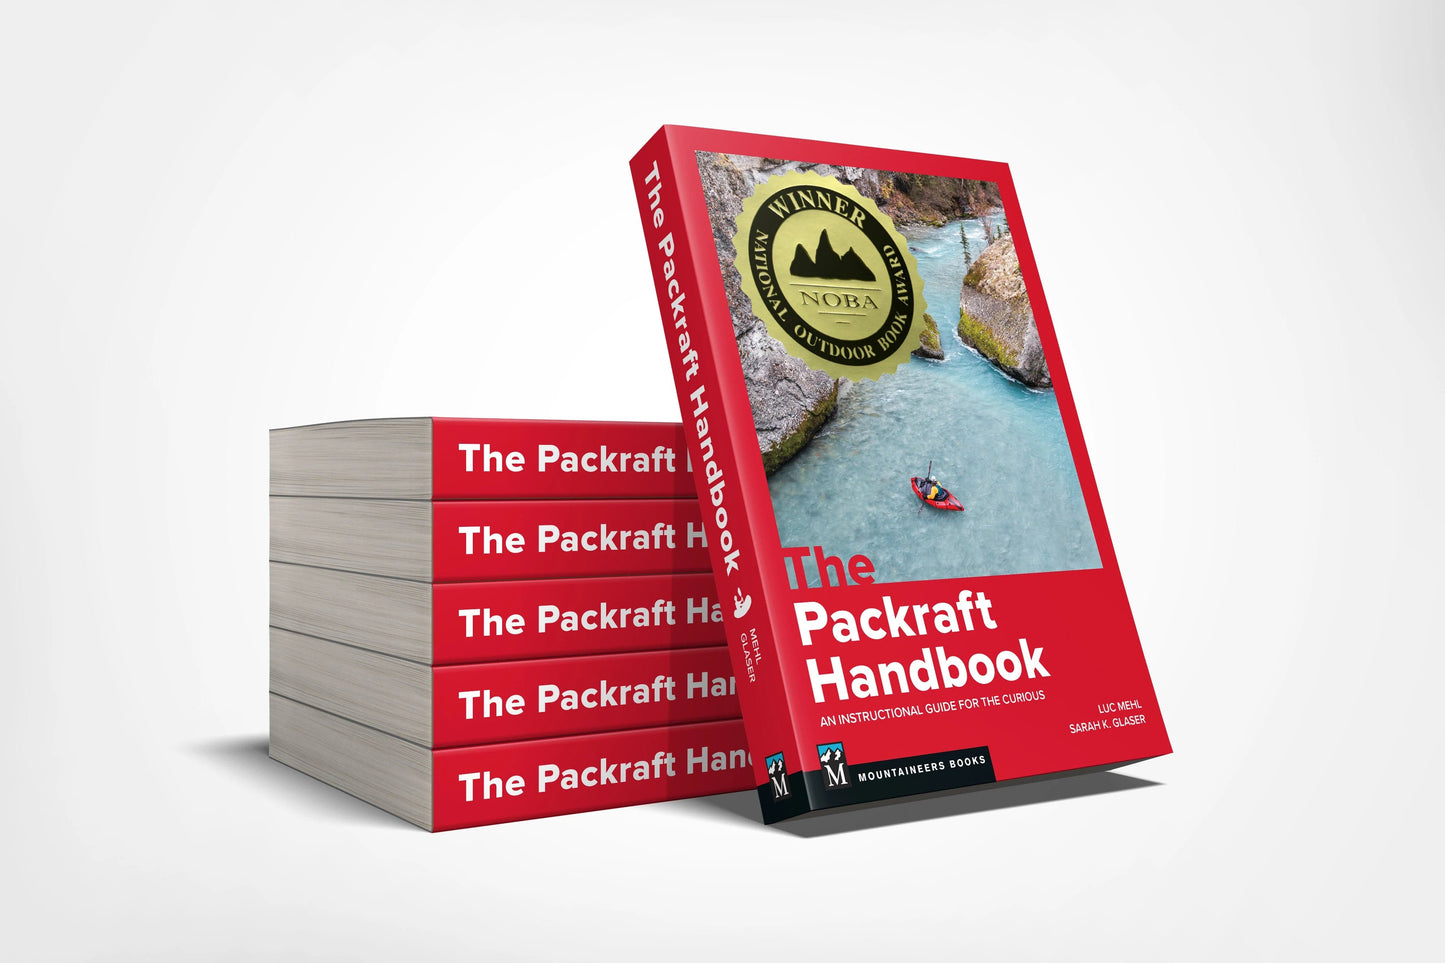 Featuring the The Packraft Handbook book, pack raft accessories manufactured by 4CRS shown here from one angle.